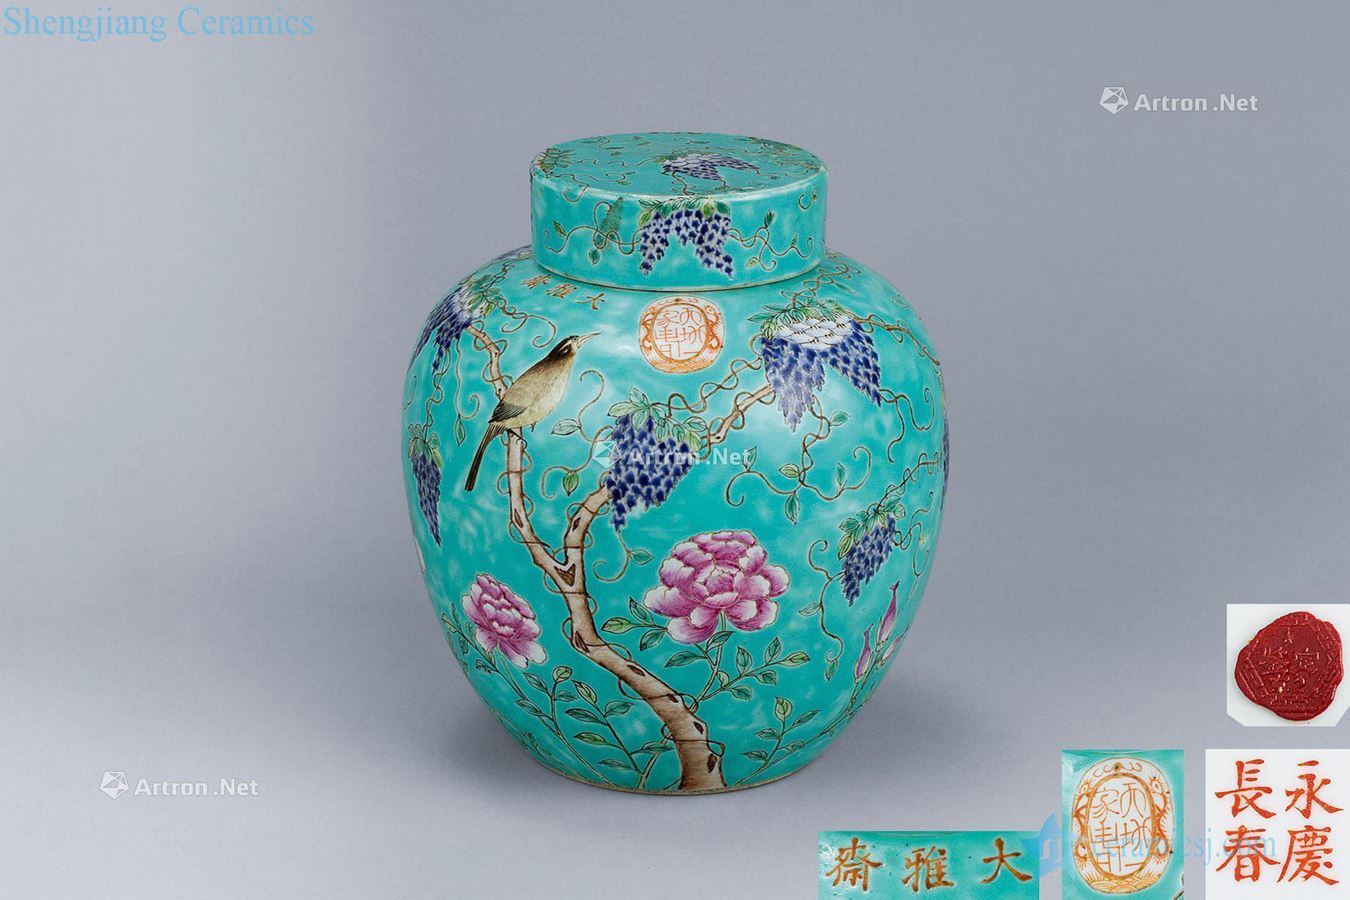 In the qing dynasty (1644-1911), jedaiah lent a hoard of green pastel grape grain cover tank